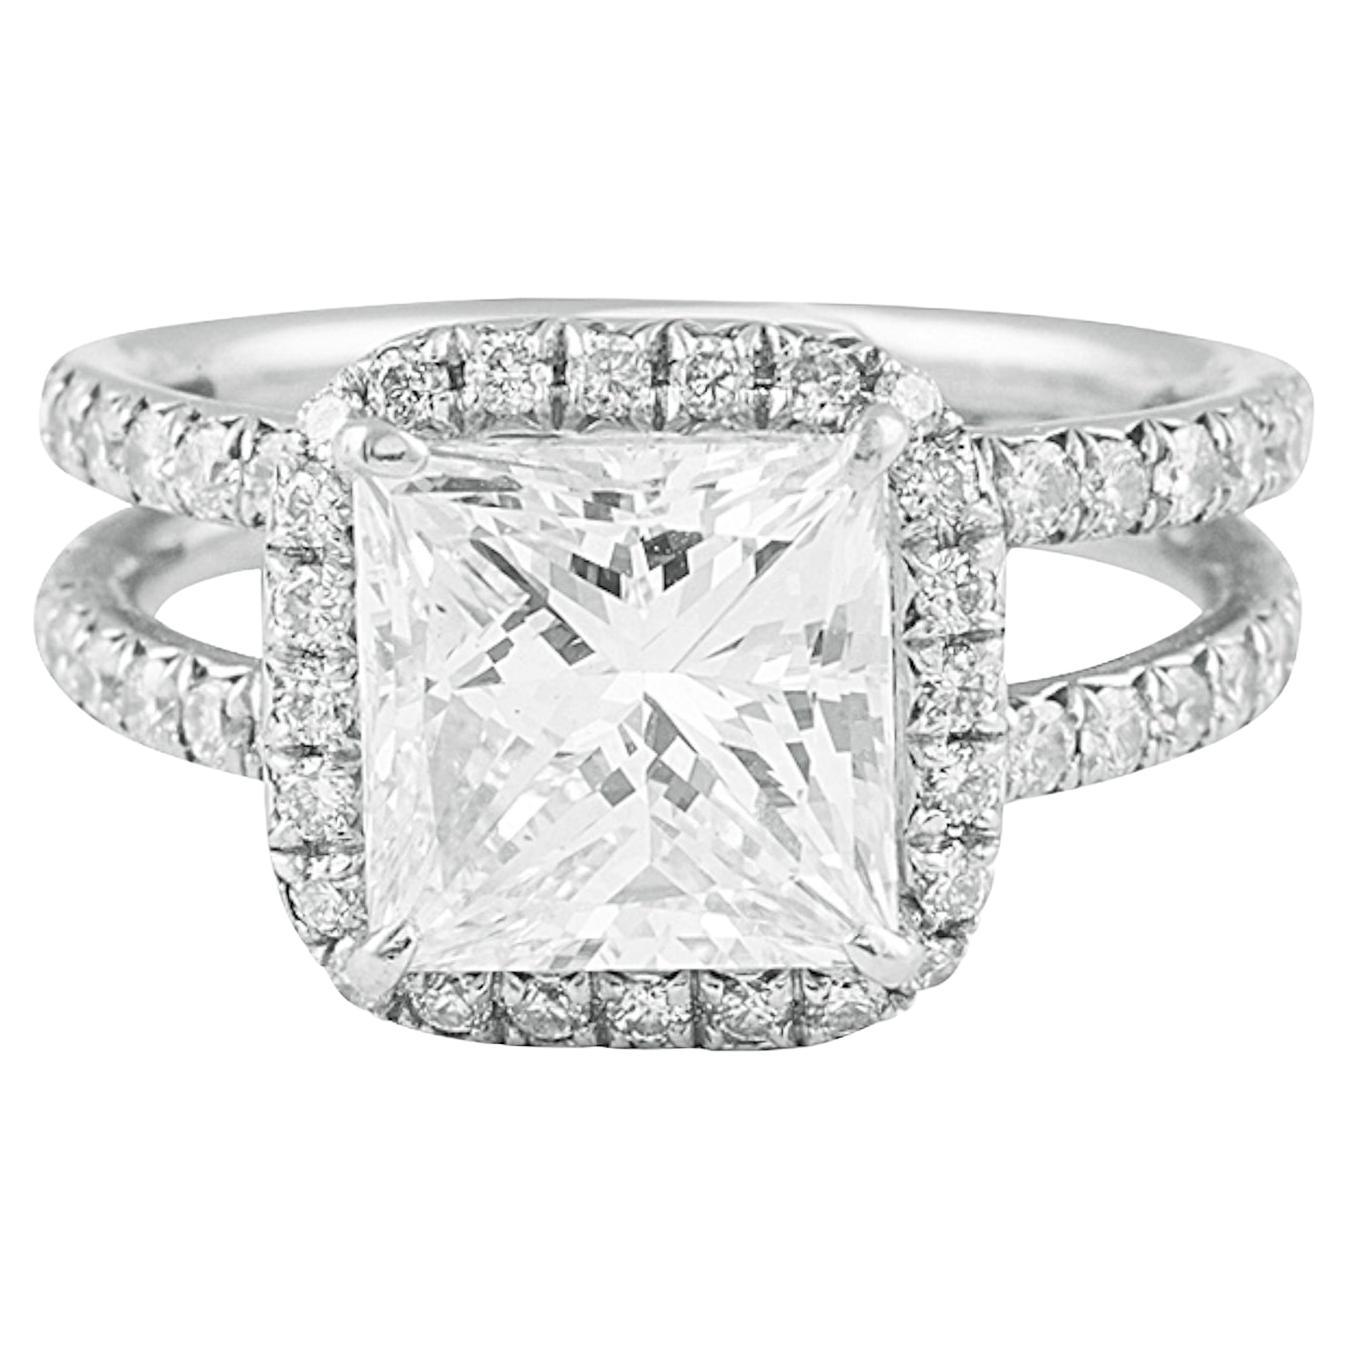 DIANA M. Platinum engagement ring featuring a center 3.00 ct GIA G VS2 PRINCESS For Sale